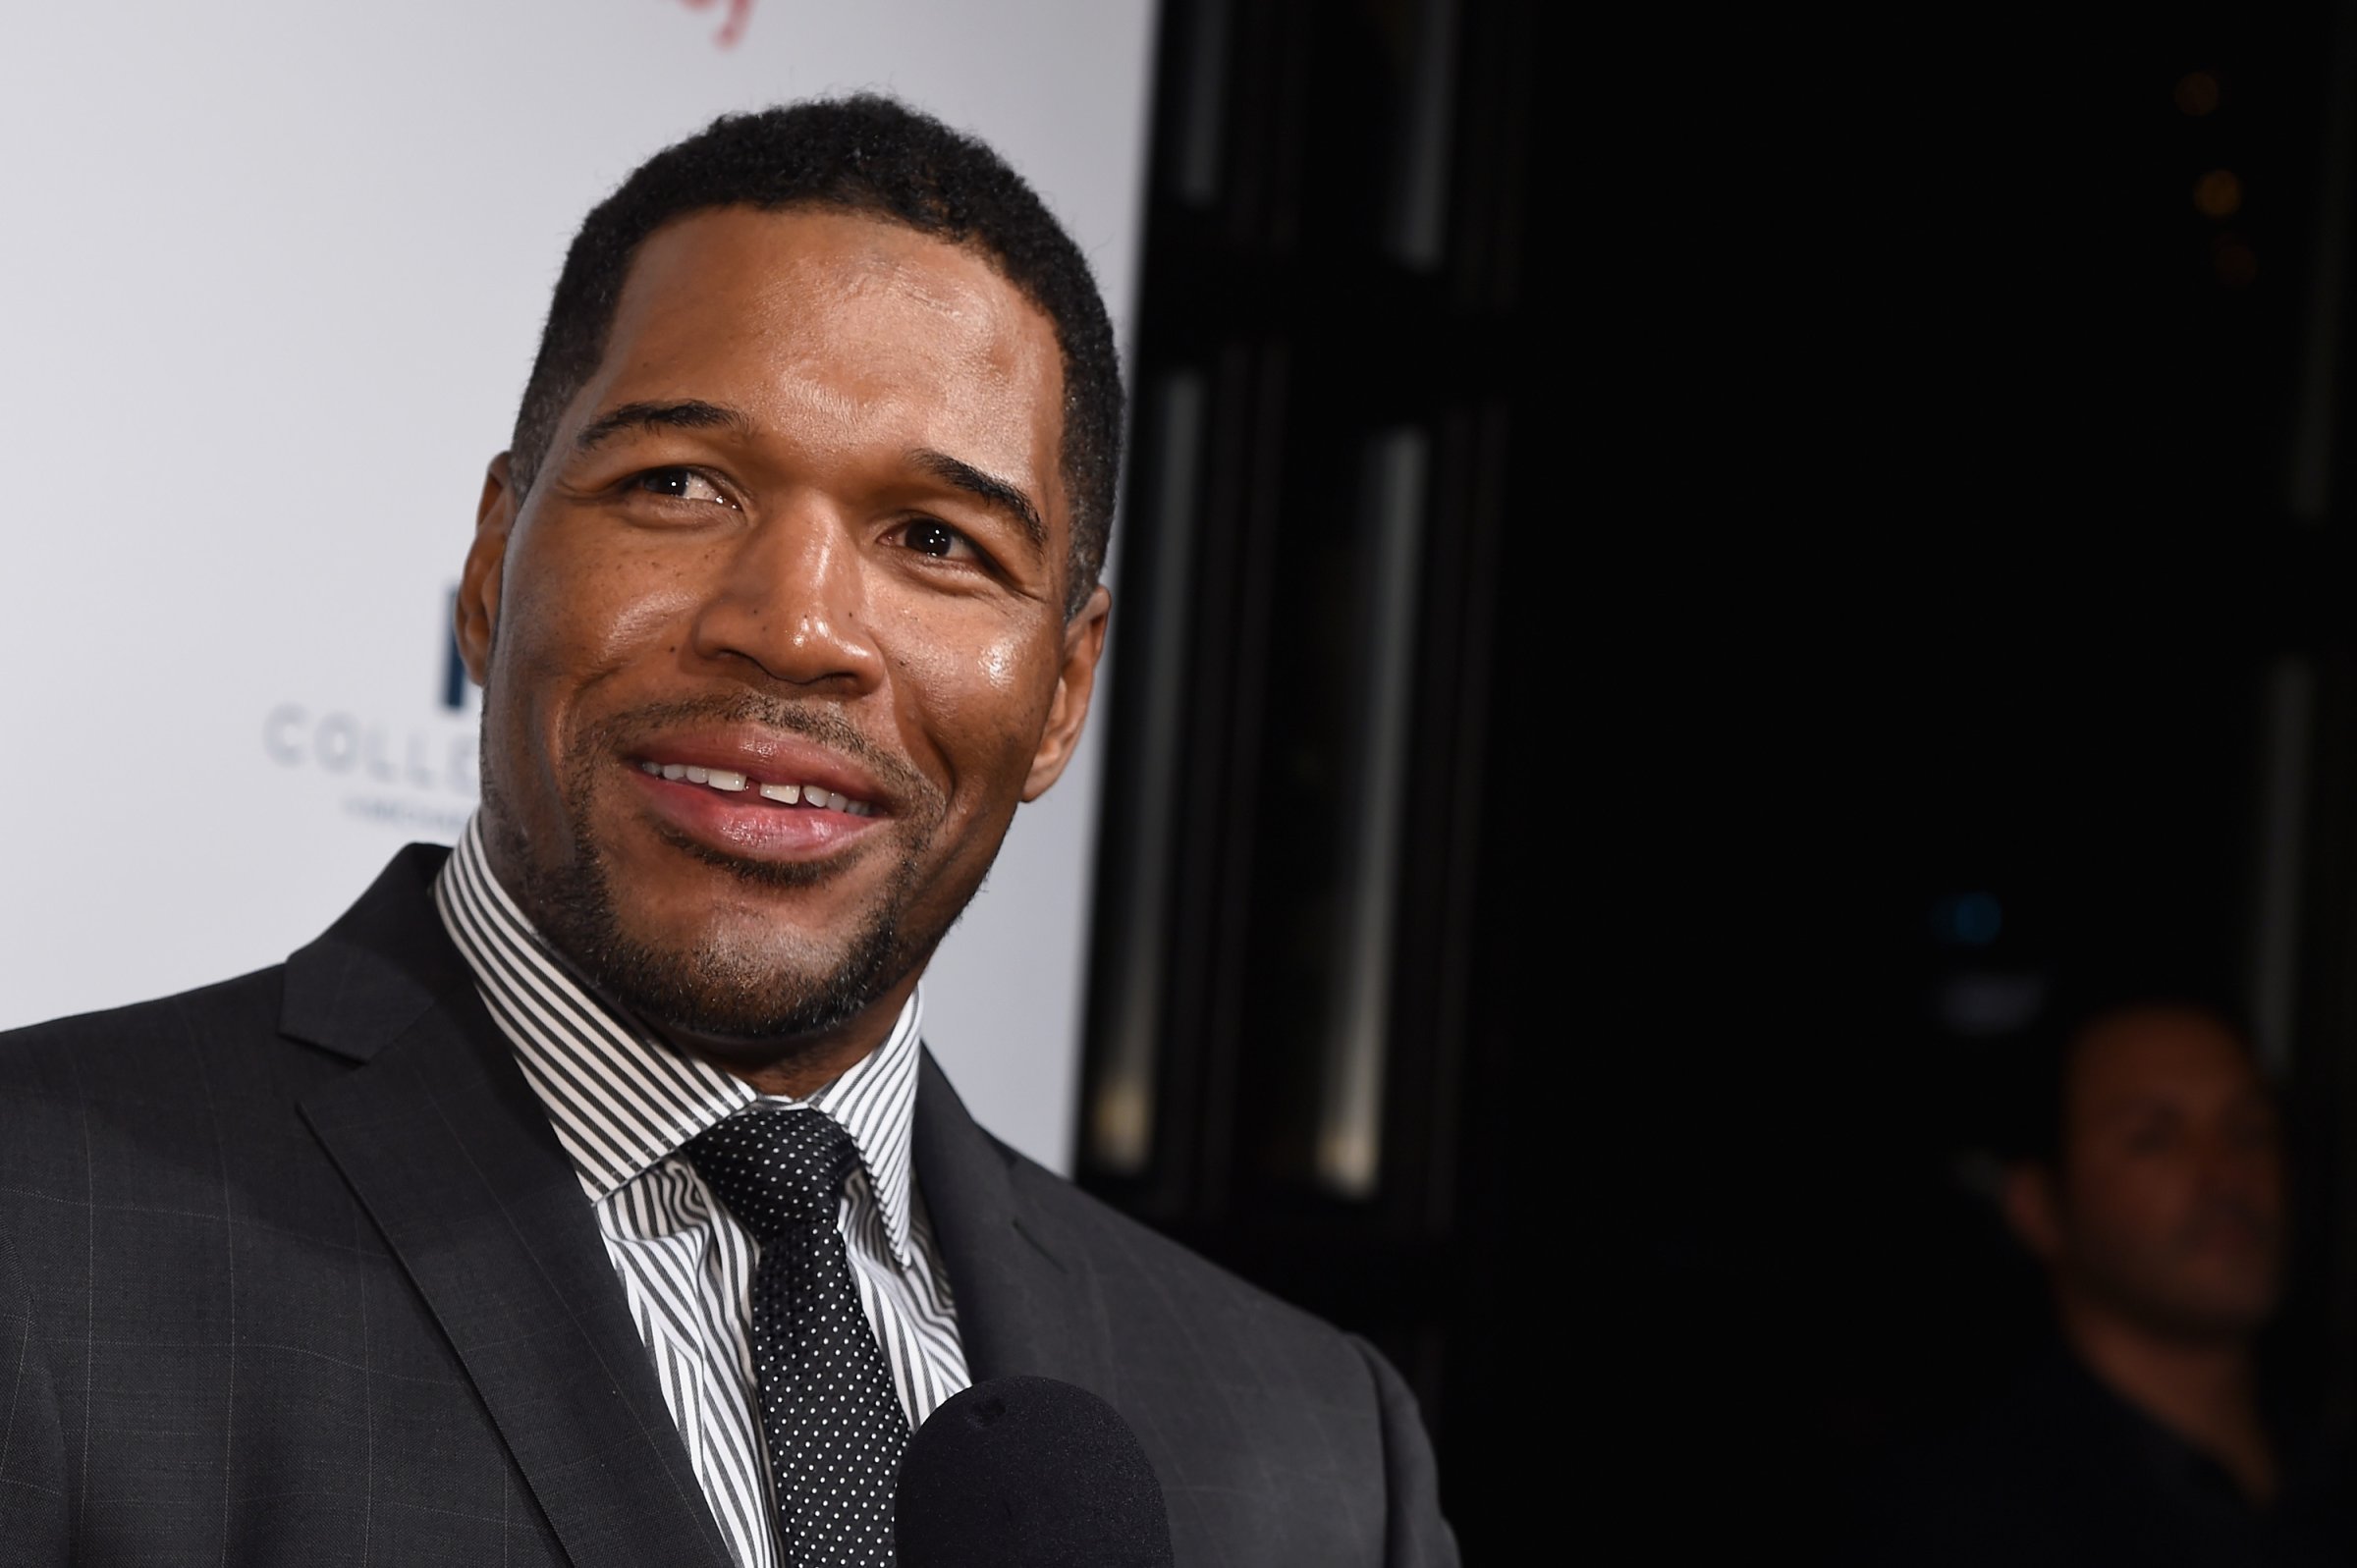 Michael Strahan attends Sports Illustrated's Fashionable 50 event at Vandal on April 12, 2016 in New York City.